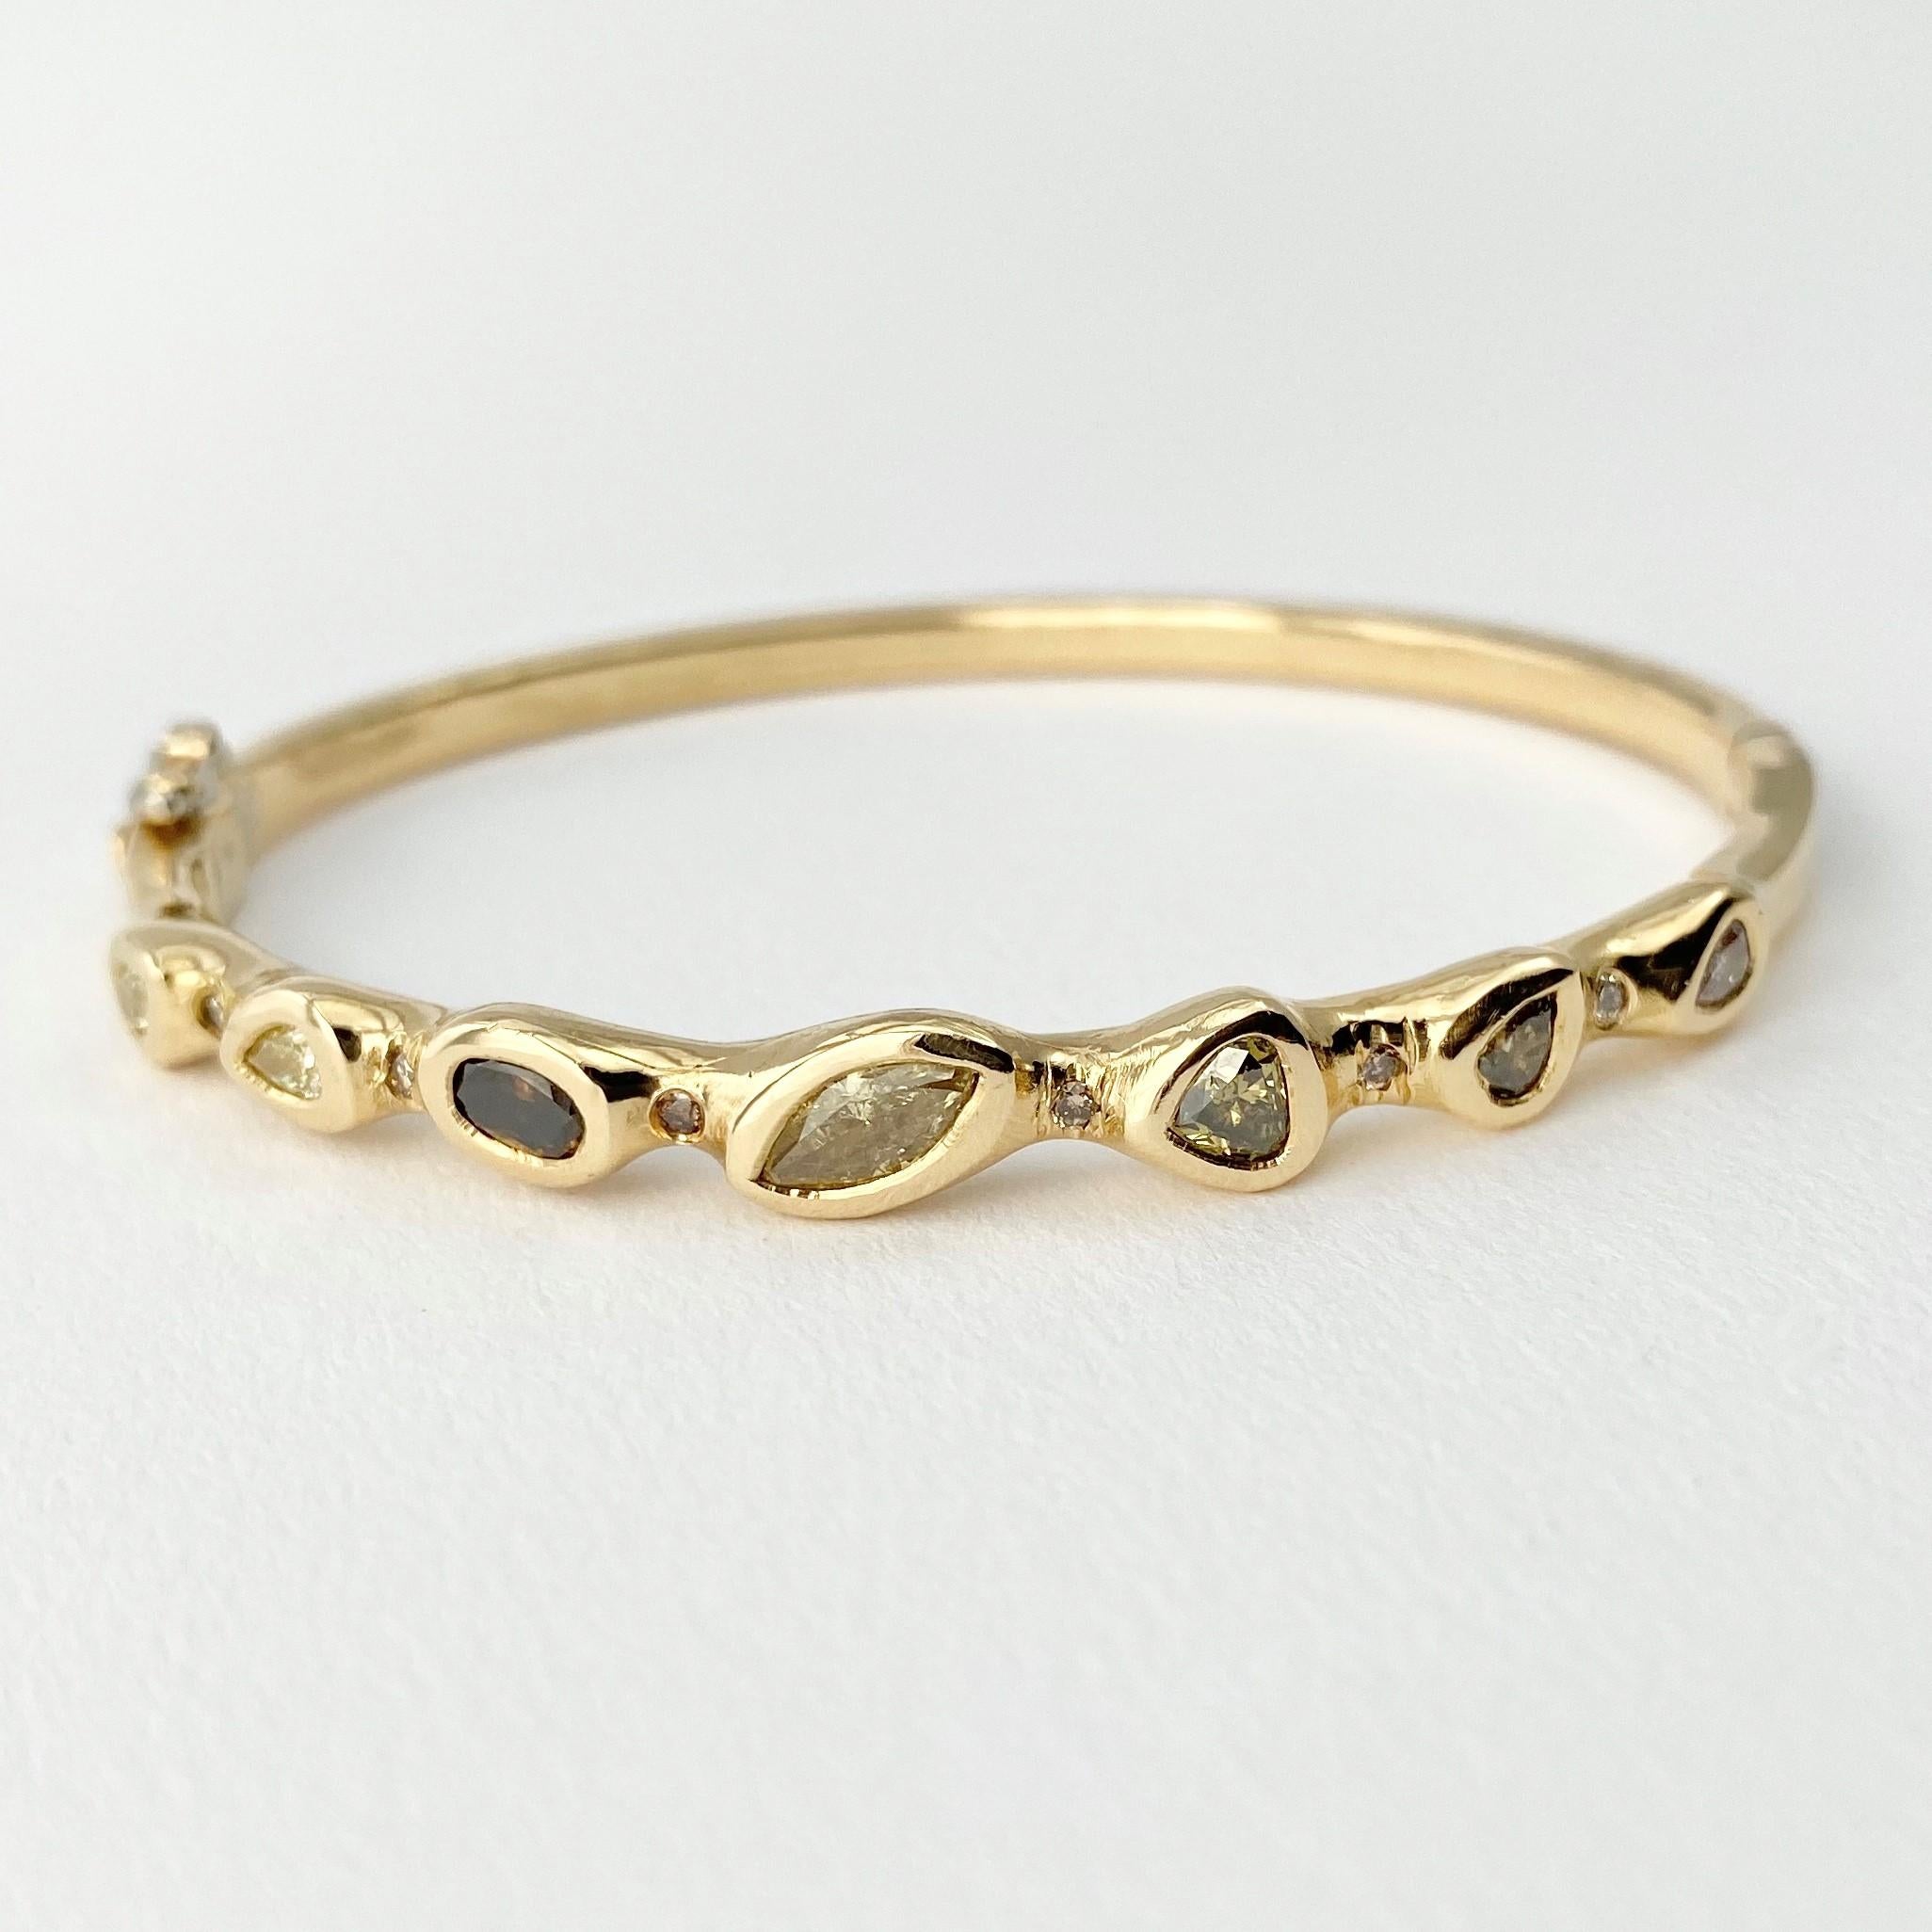 The Stepping Stone hinged bangle bracelet, from our Barefoot Collection, is hand-crafted with 18-karat recycled yellow gold, and features seven bezel set, colored diamonds (five pear shape, one marquise, and one oval) in various sizes; and six round